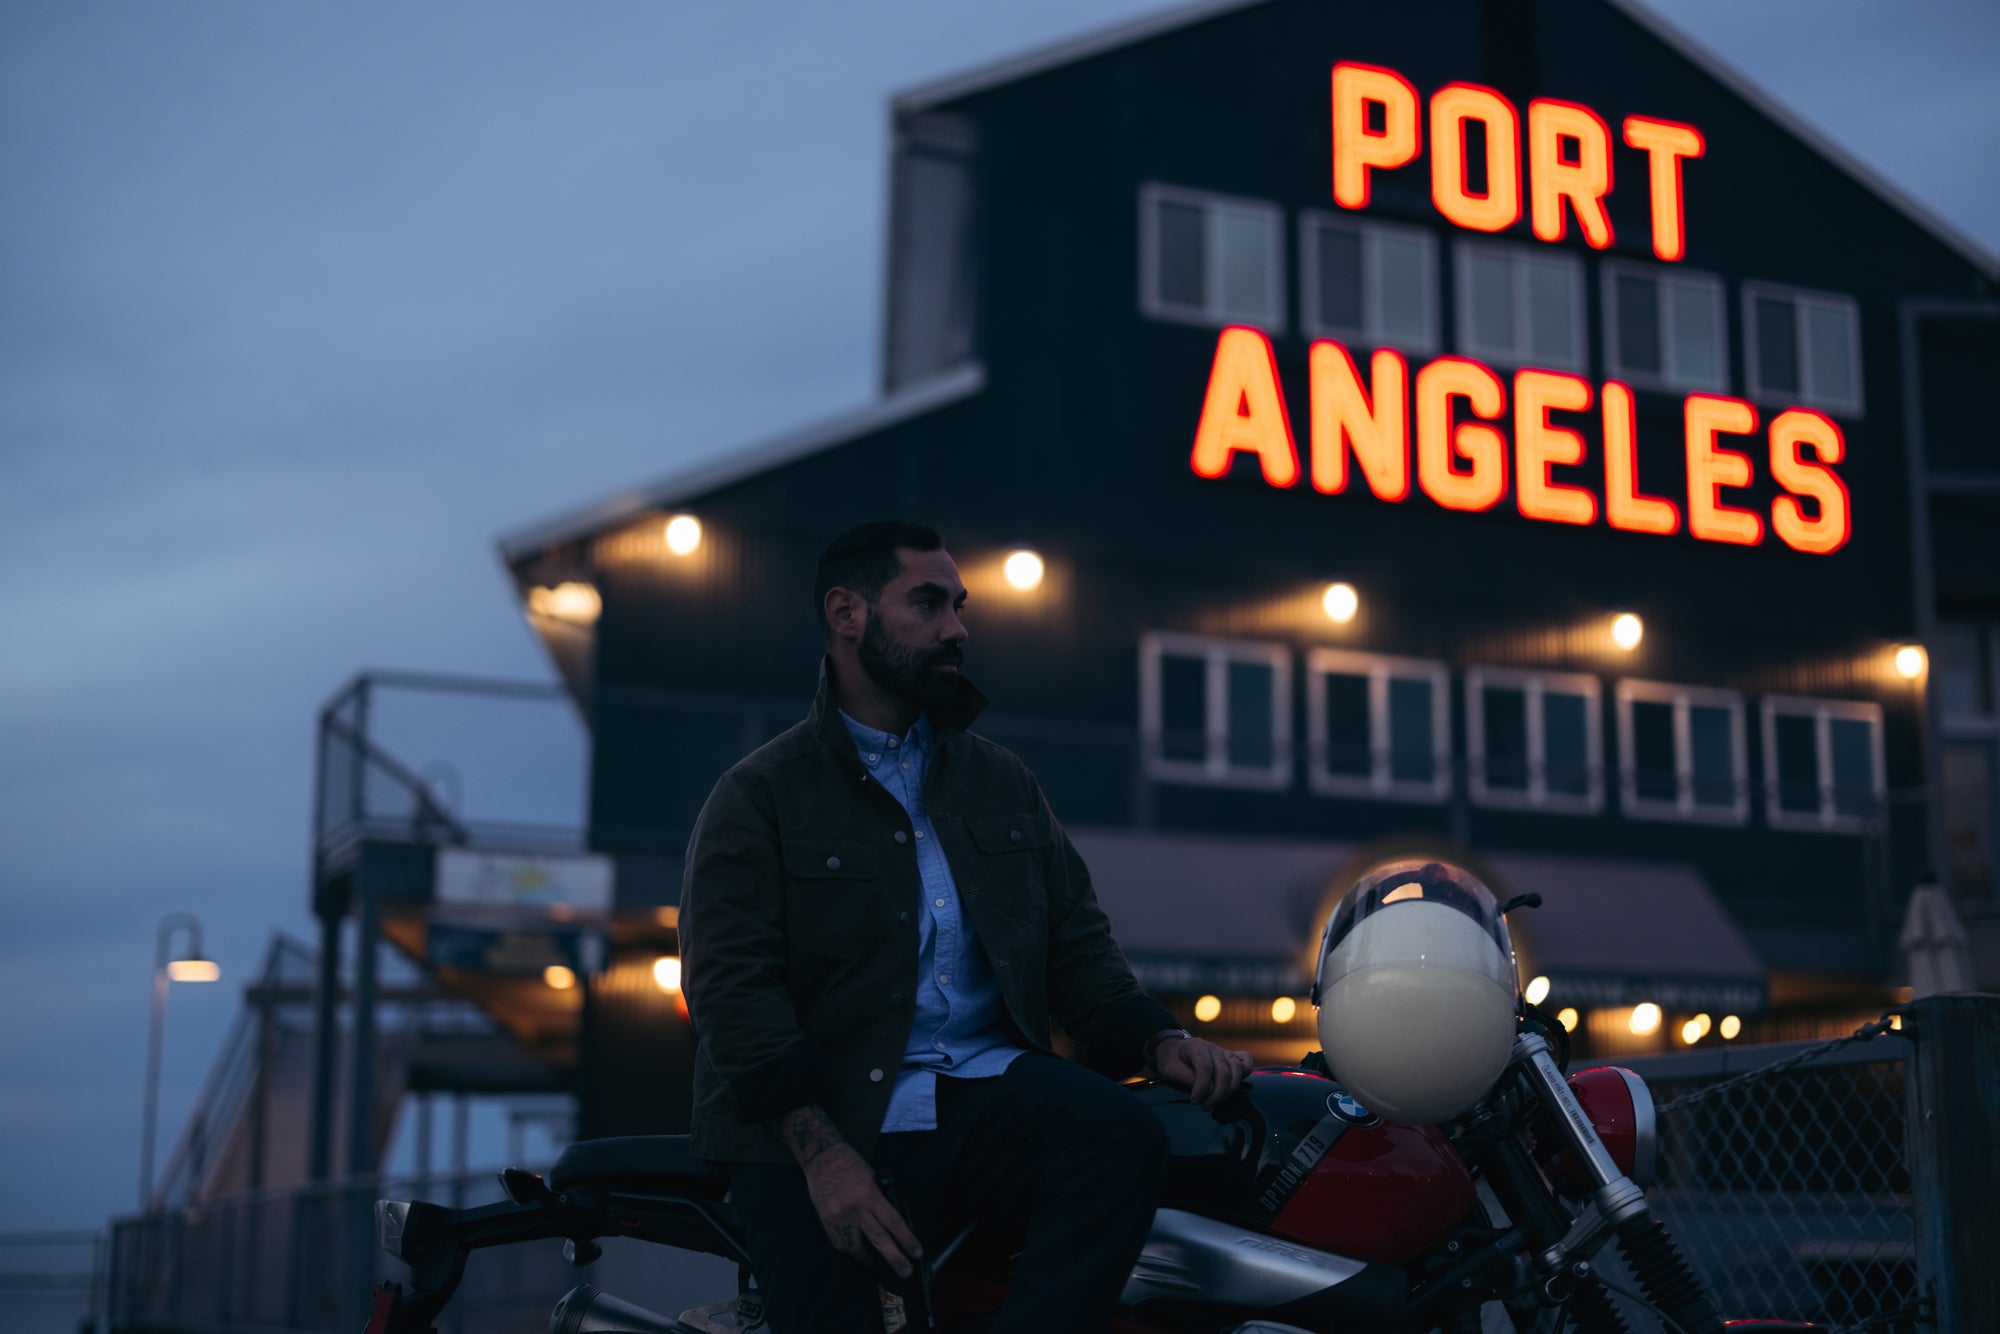 Man sitting on the side of BMW motorbike at the Port Angeles Wharf